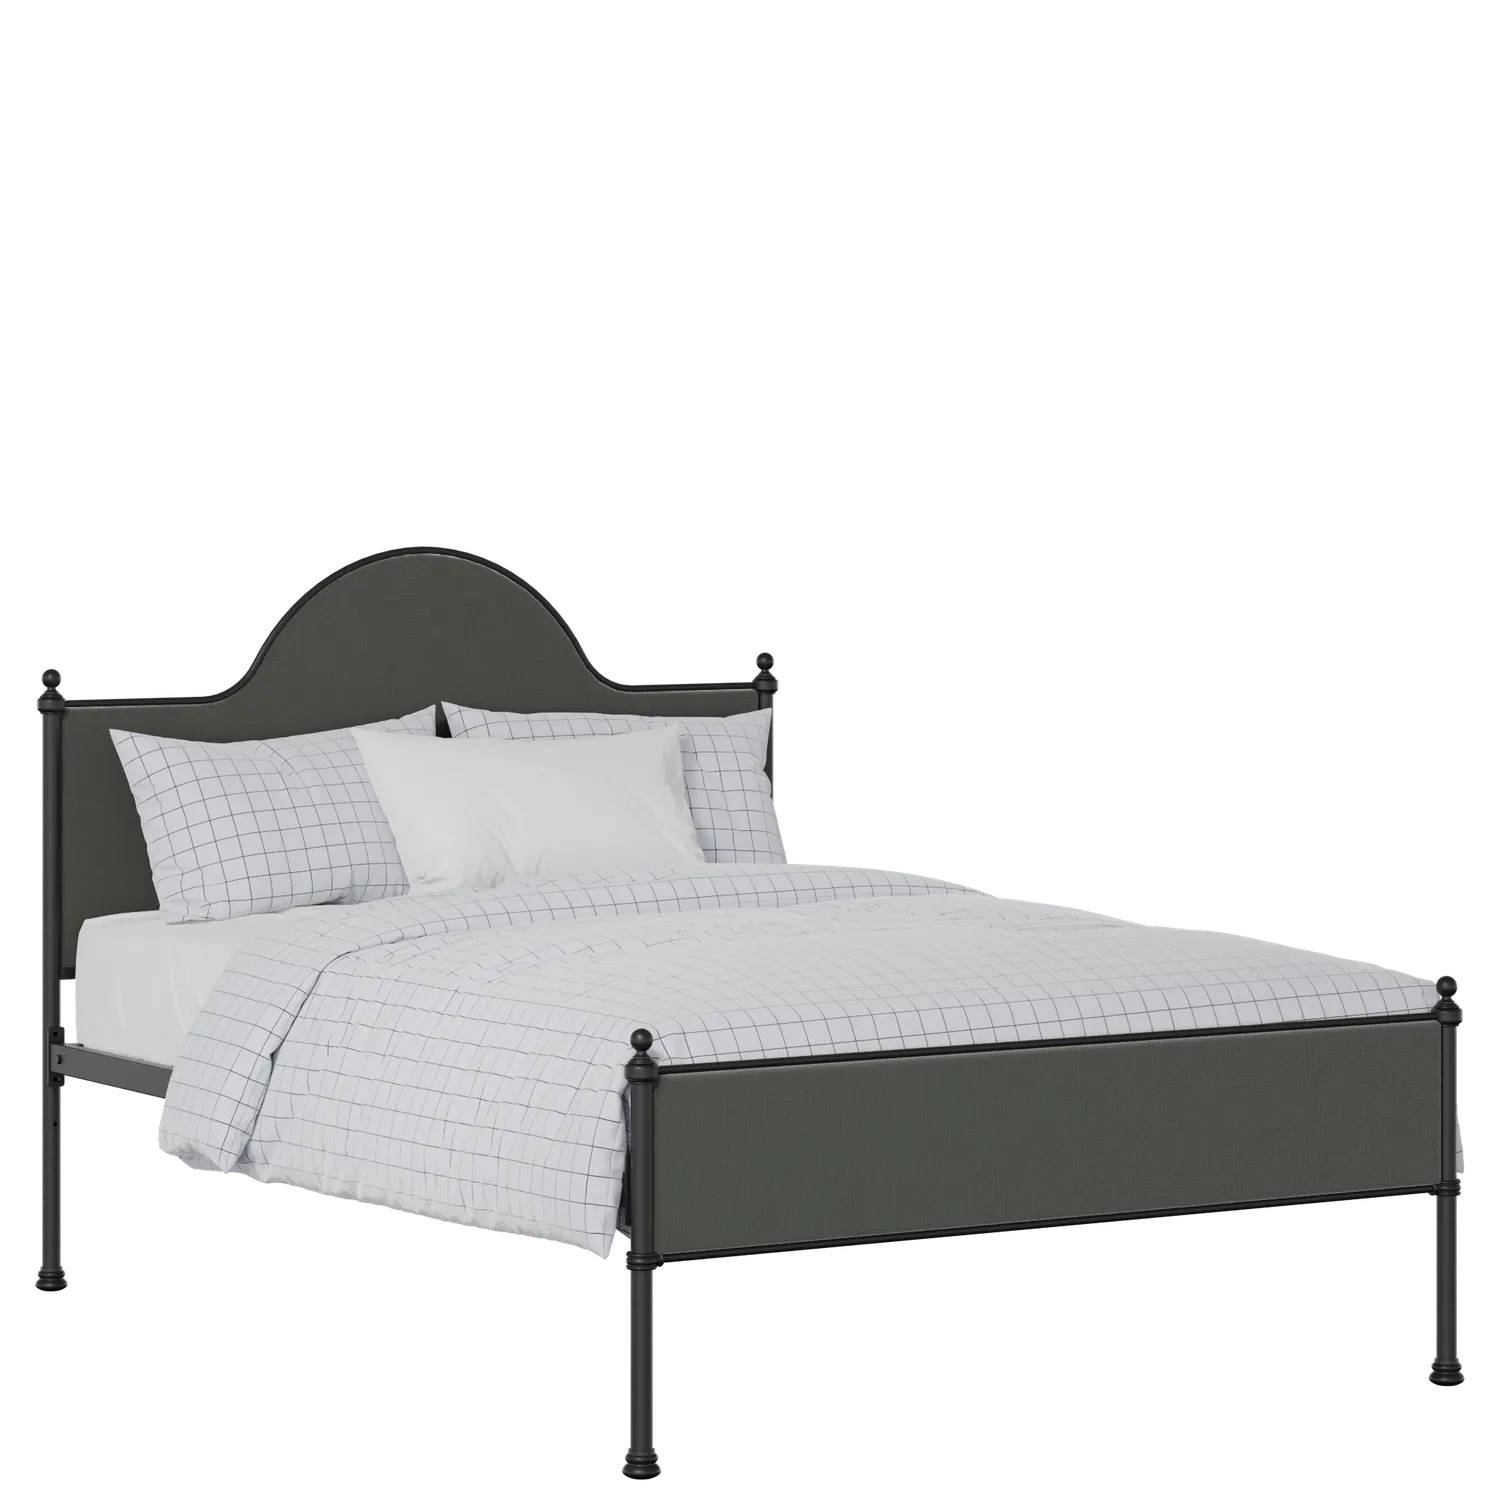 Albert Slim iron/metal upholstered bed in black with iron fabric